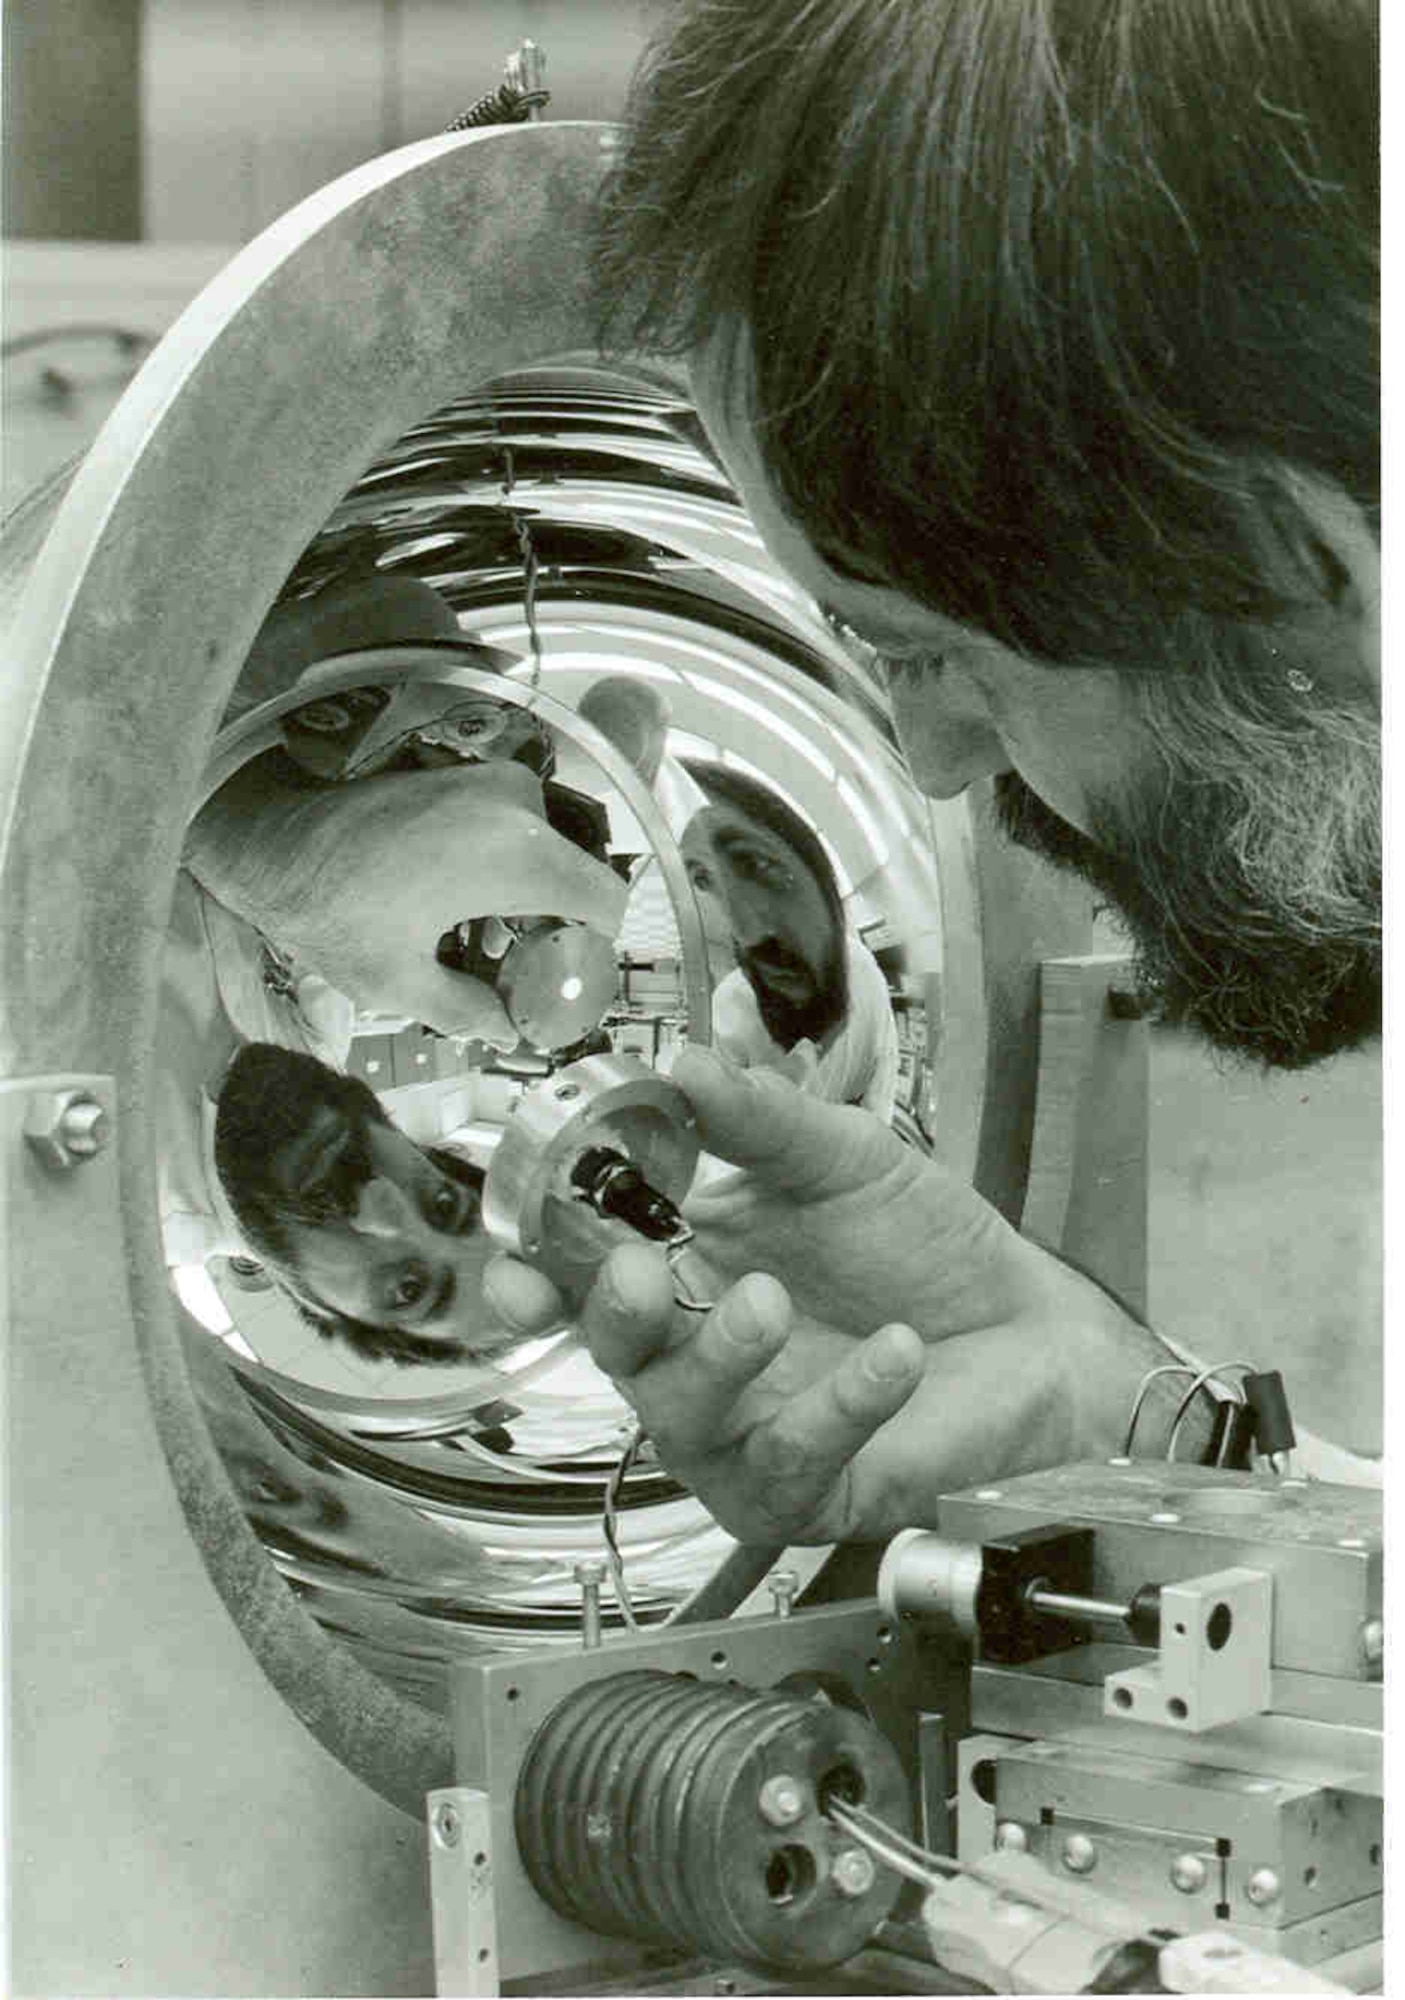 Arnold Engineering Development Center research engineer Bob Wood uses a light source to study a hemiellipsoidal mirror. The apparatus was to measure infrared reflectance of satellite materials and other hardware exposed to the cold temperatures of space. This image was featured on the frontpage of the February 1982 issue of High Mach. (U.S. Air Force photo)